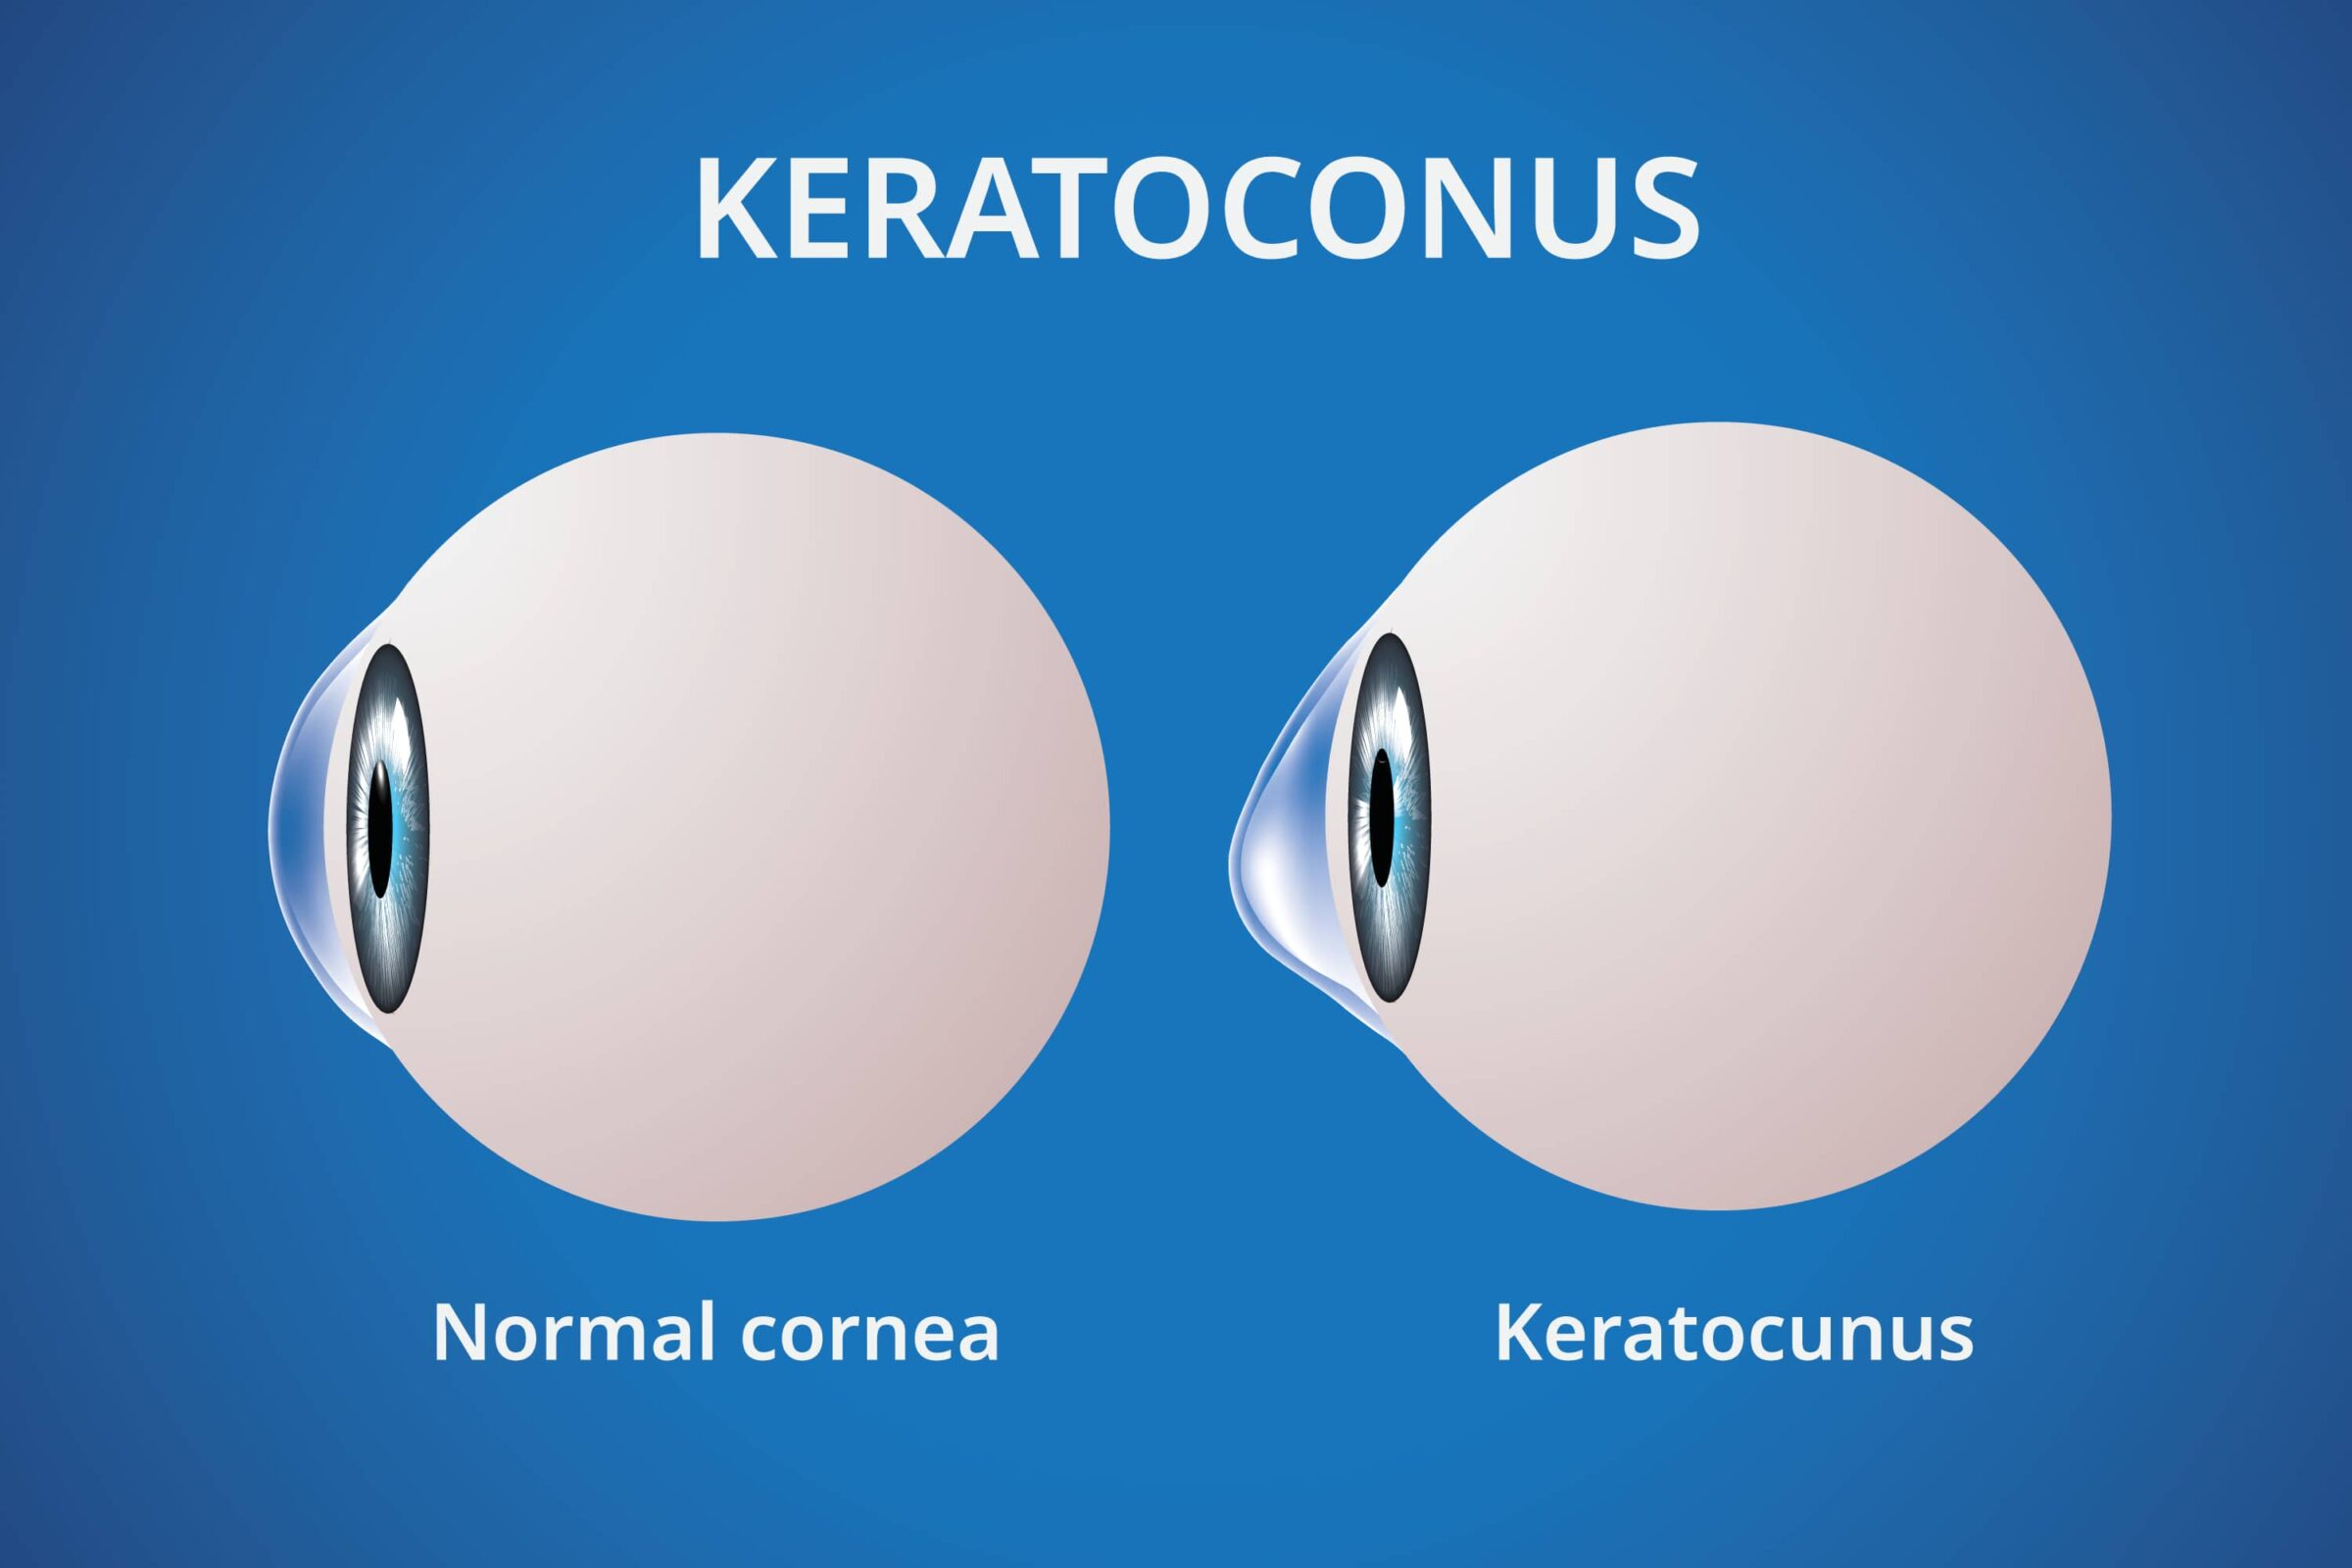 Early detection and treatment can help slow the progression of Keratoconus and improve your quality of life